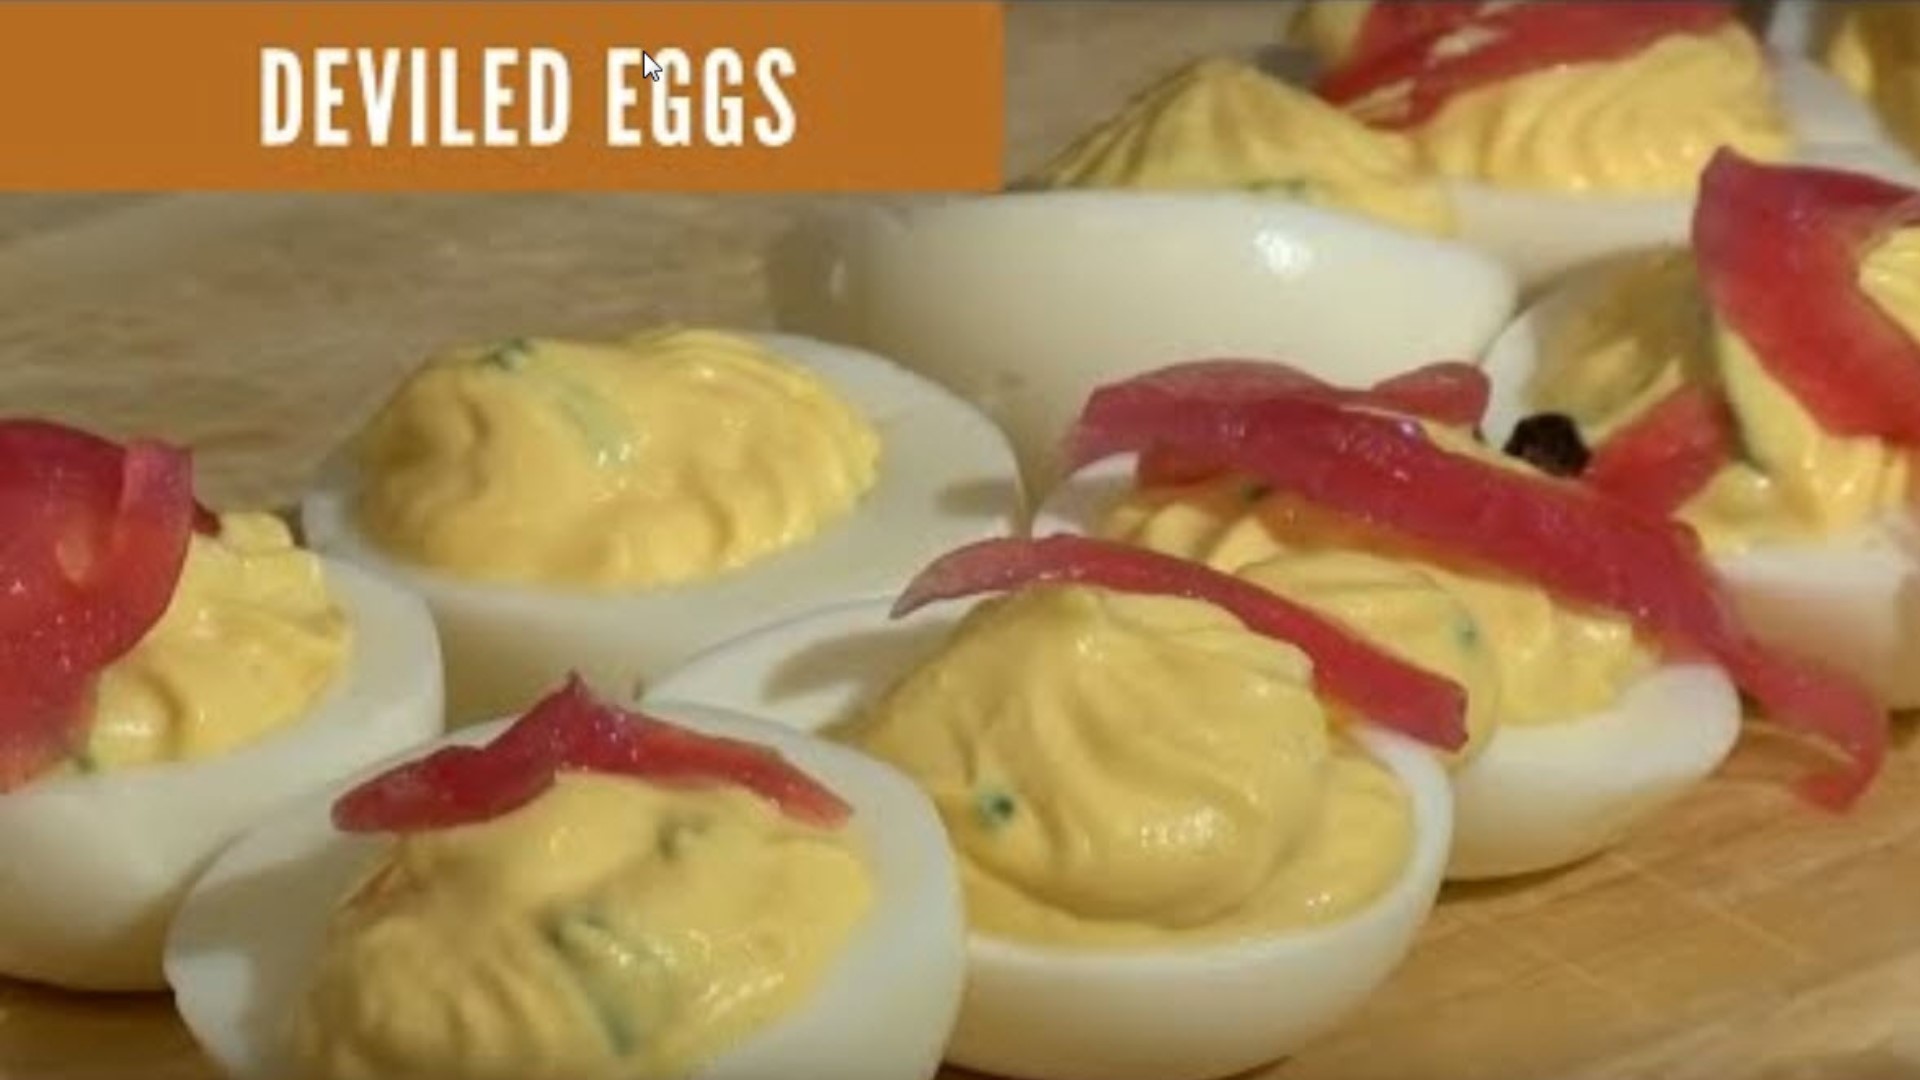 Holiday, Christmas and New Year's parties call for great appetizers. Don't bust your calorie budget -make this healthy spin on deviled eggs.